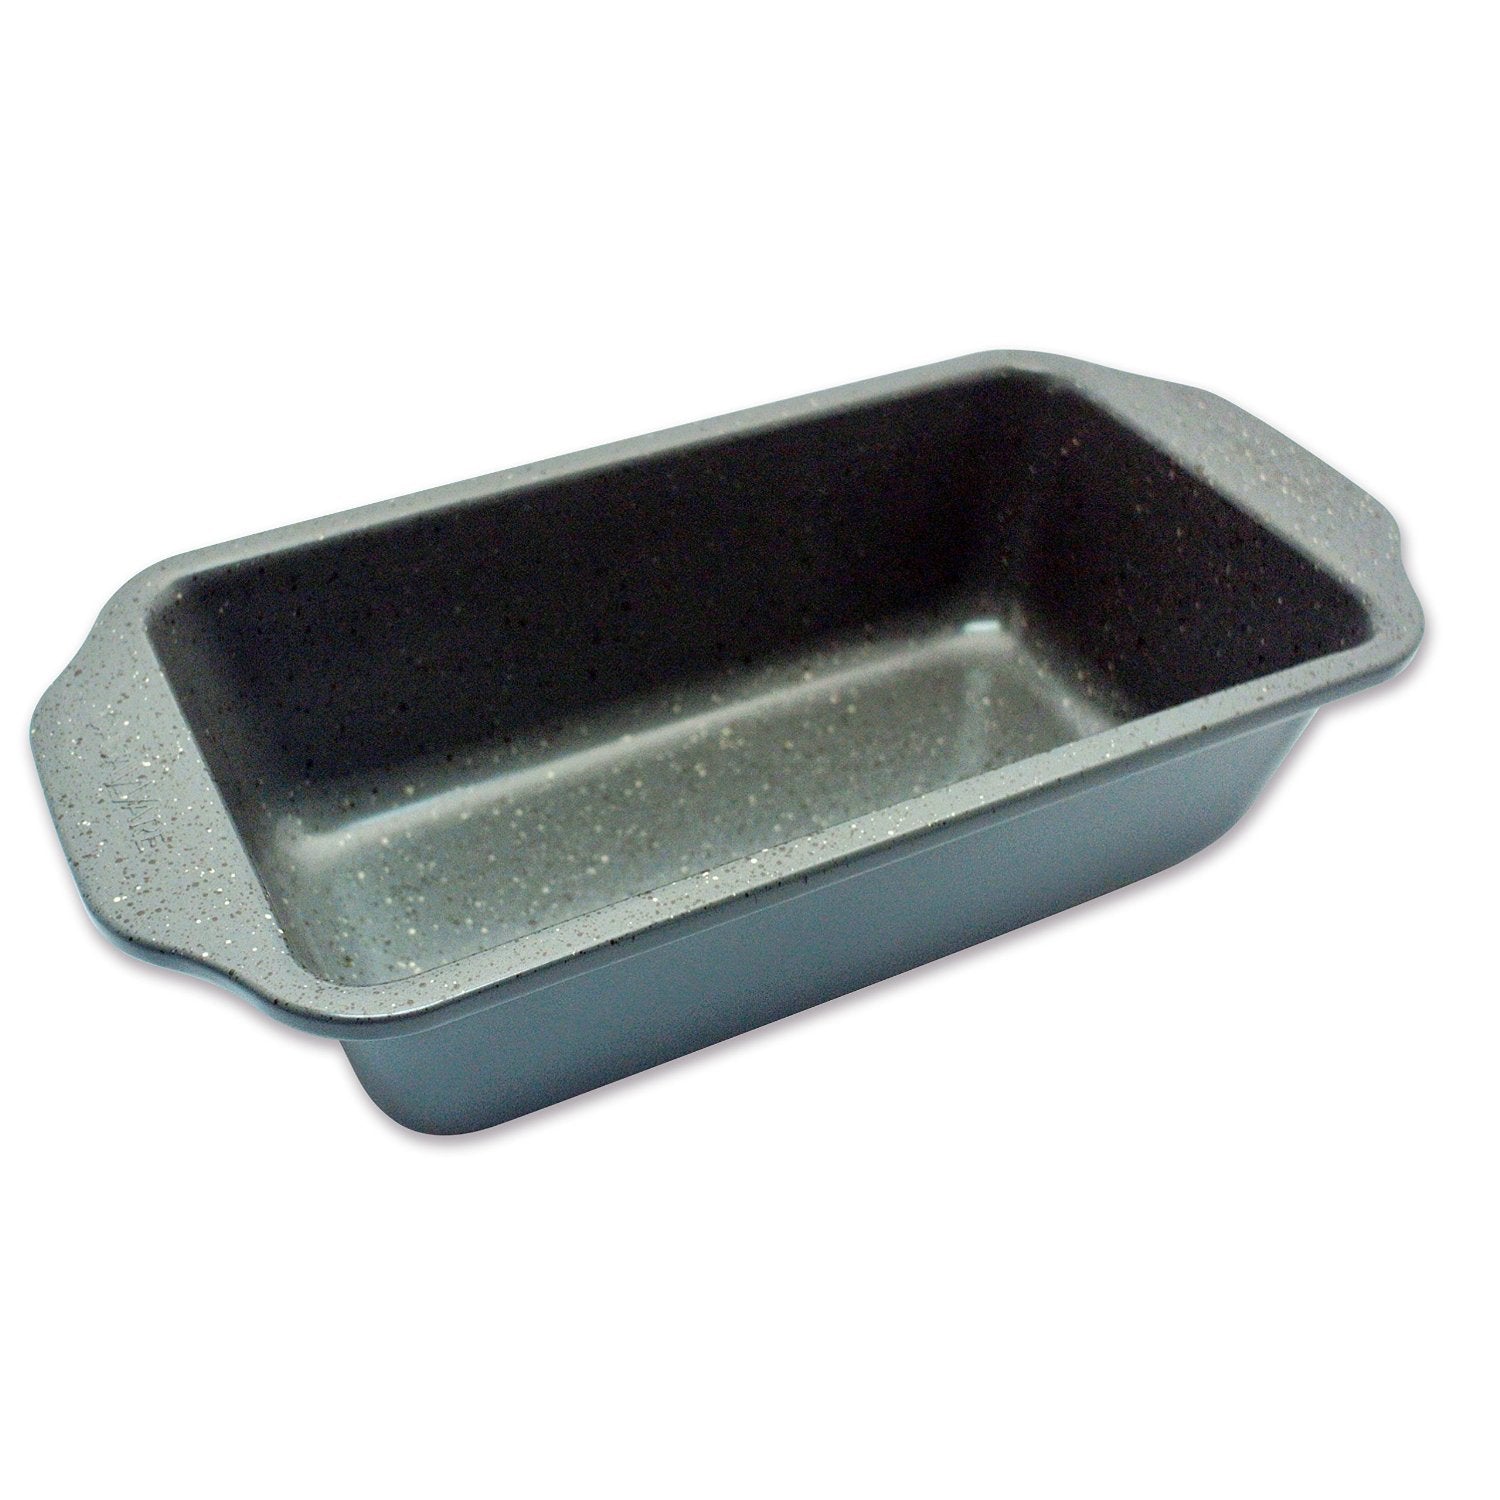 casaWare Loaf Pan 9 x 5-Inch Ceramic Coated Non-Stick (Silver